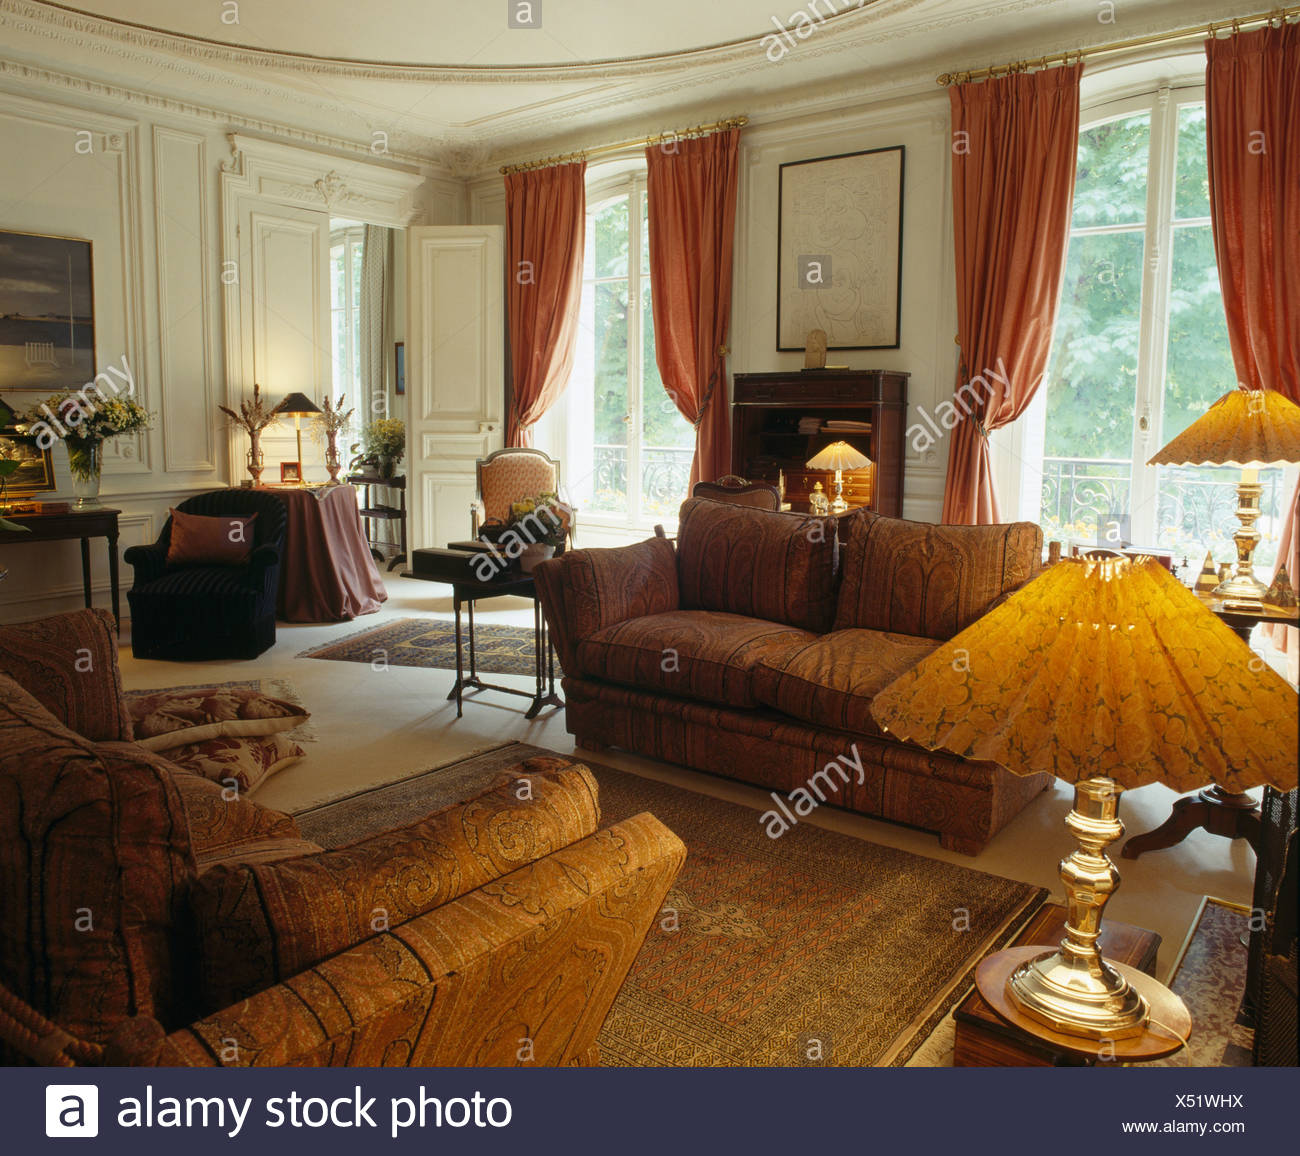 Lighted Lamps And Comfortable Brown Sofas In Country Drawing Room With Red Curtains At French Windows Stock Photo Alamy